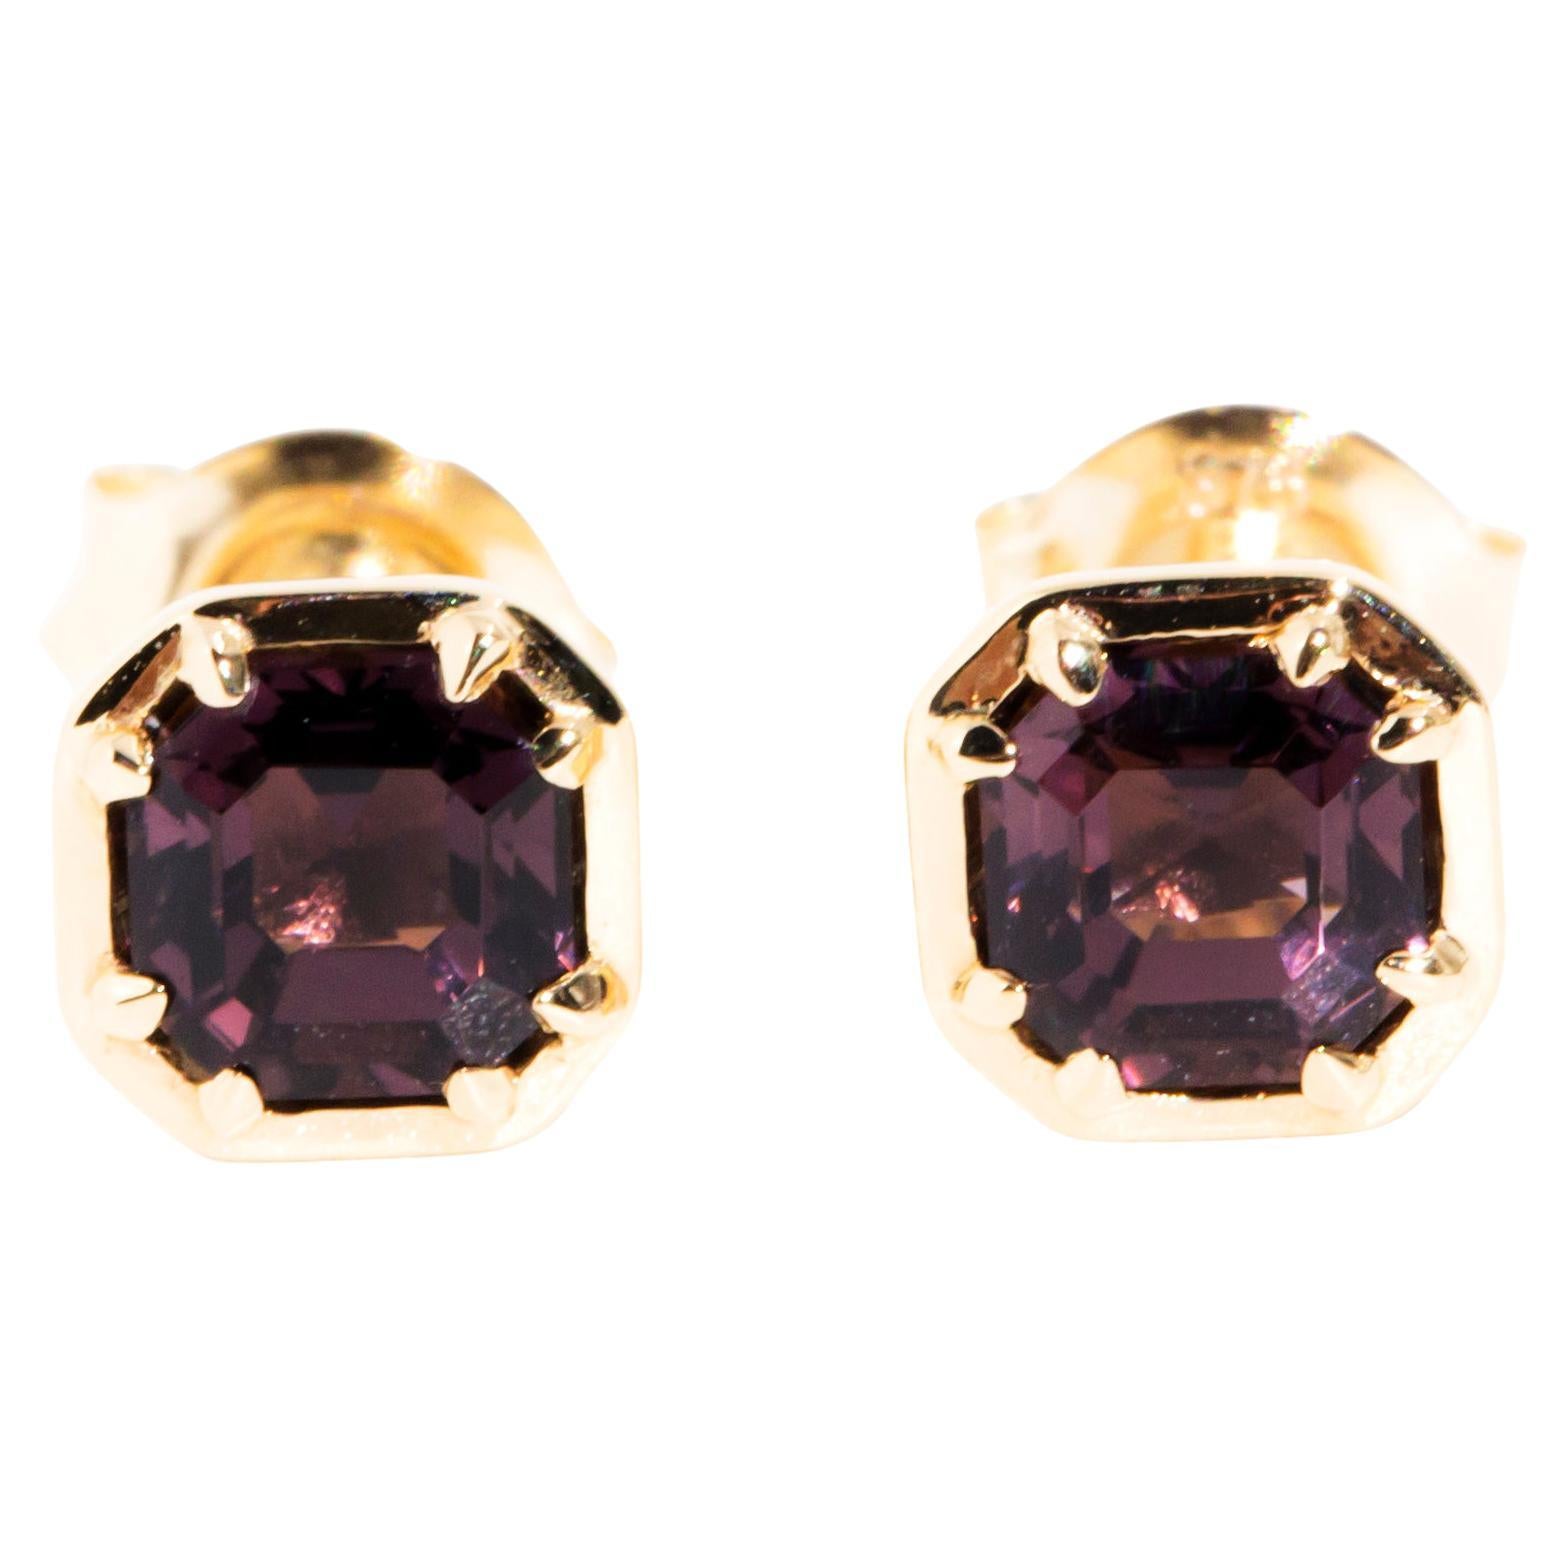 Deep Pink Spinel Contemporary Stud Style Earrings in 9 Carat Yellow Gold